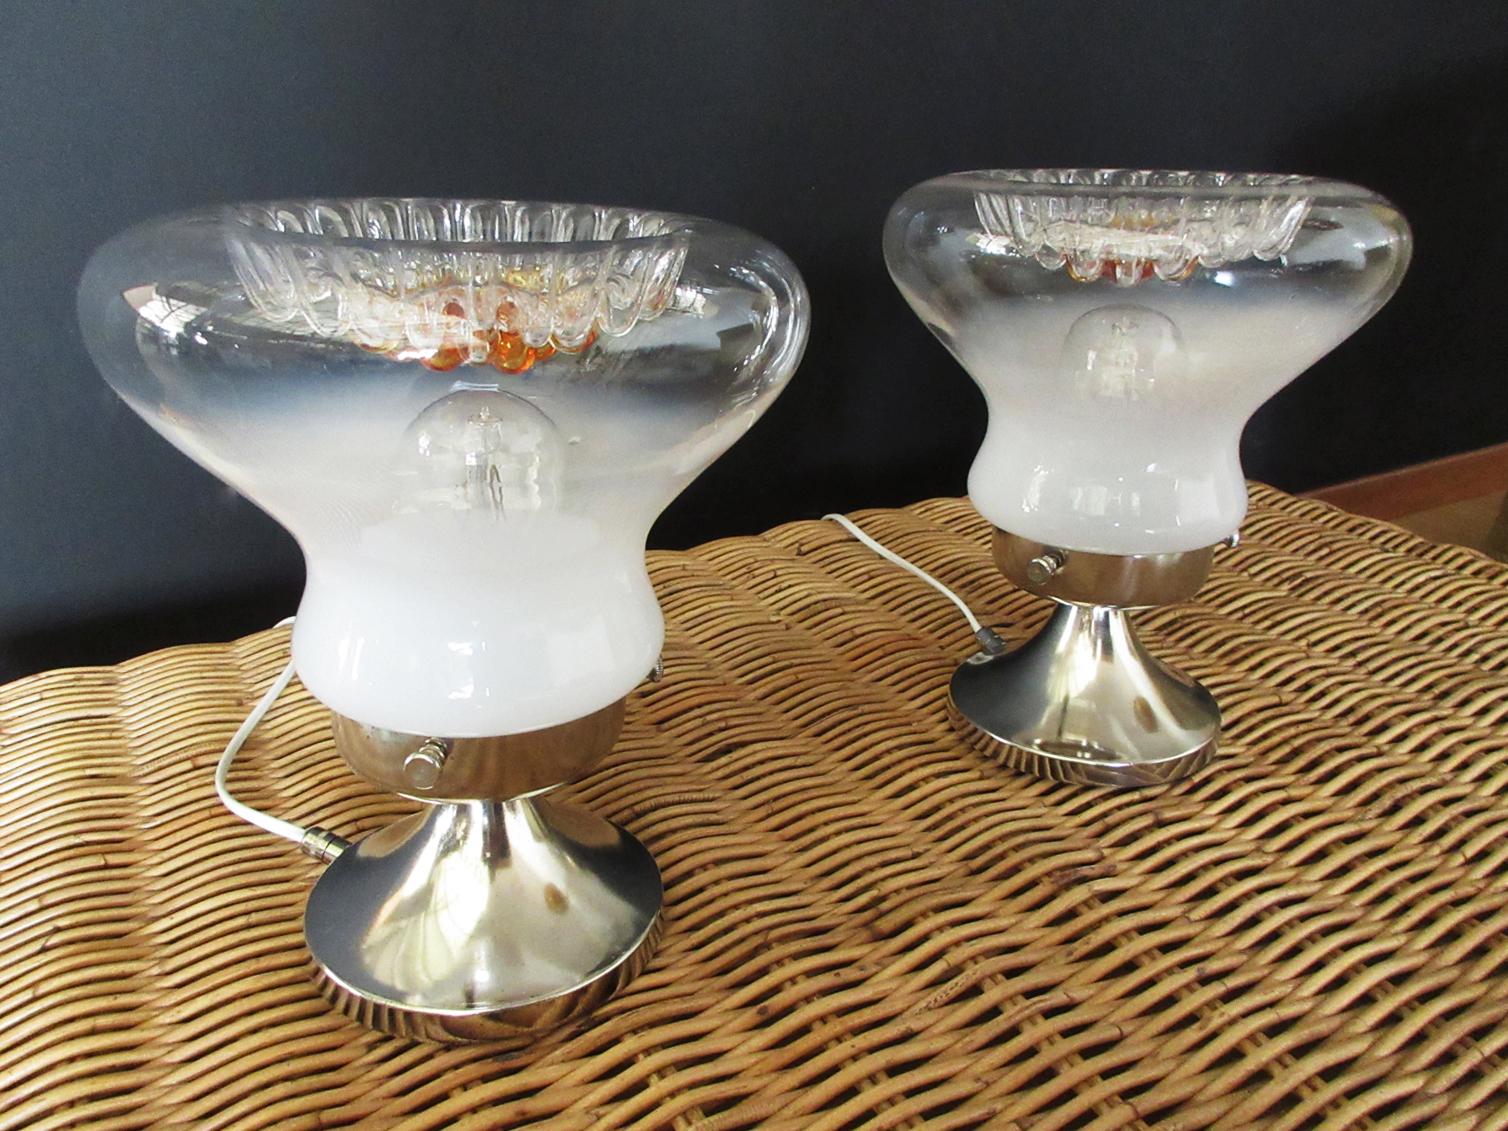 Couple of Italian vintage Murano table lamps made by two fantastic glasses, white color at the bottom, transparent and caramel in the upper part, typical colors of the Mazzega glasses. Nickel metal frame. The power cable and the switch has been